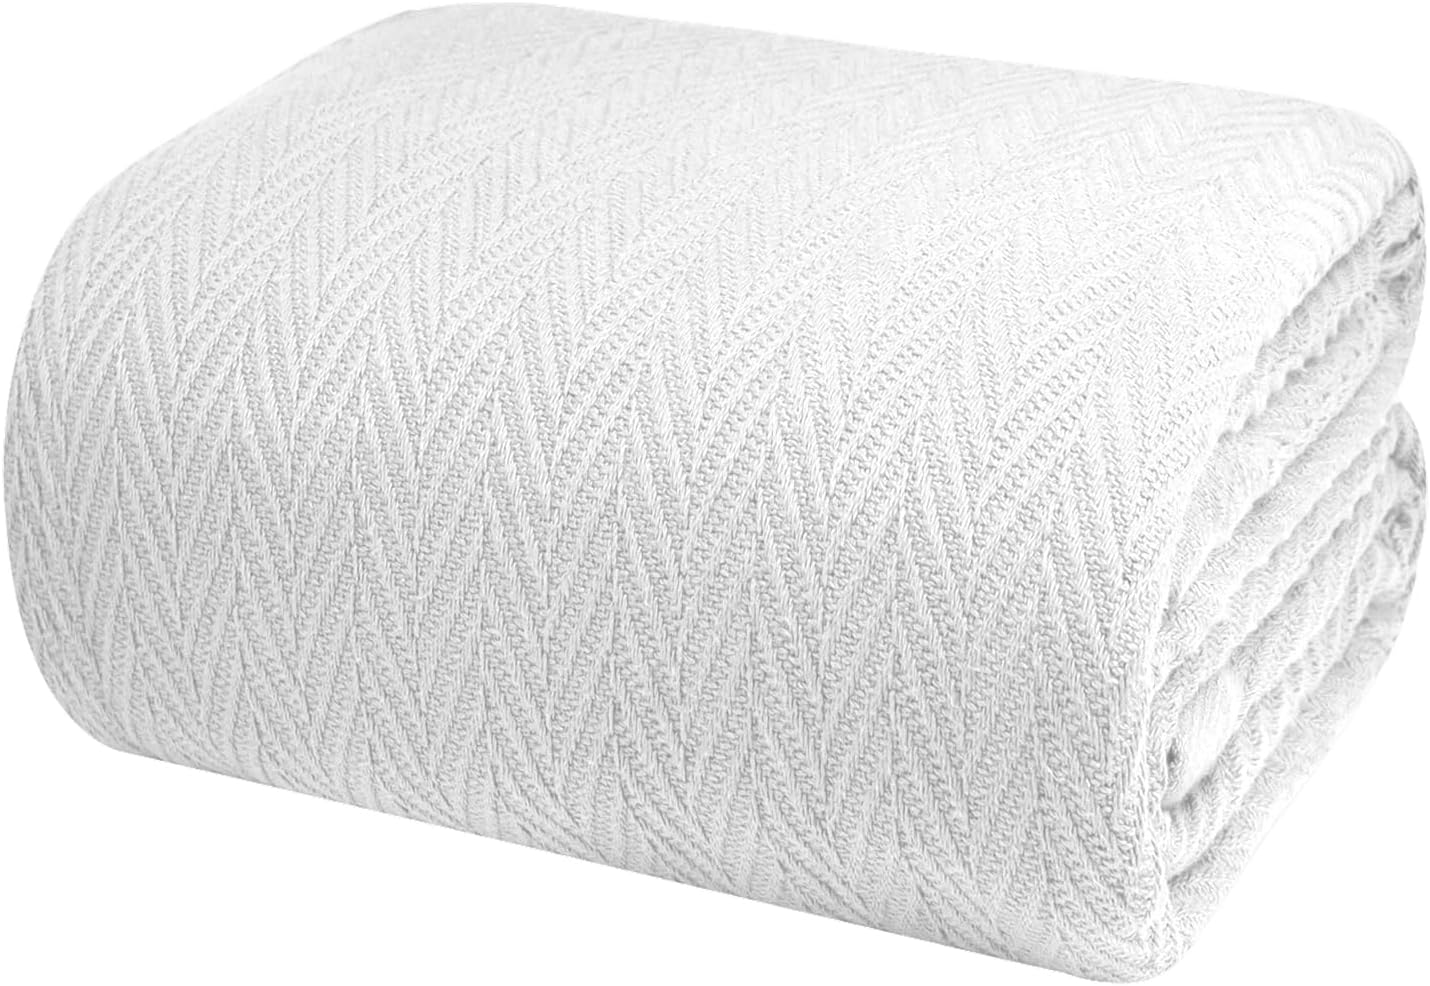 Premium 100% Cotton Blanket  Soft Breathable Thermal Blankets Queen Size for All Season - Queen Blanket for Bed Perfect for Layering - White